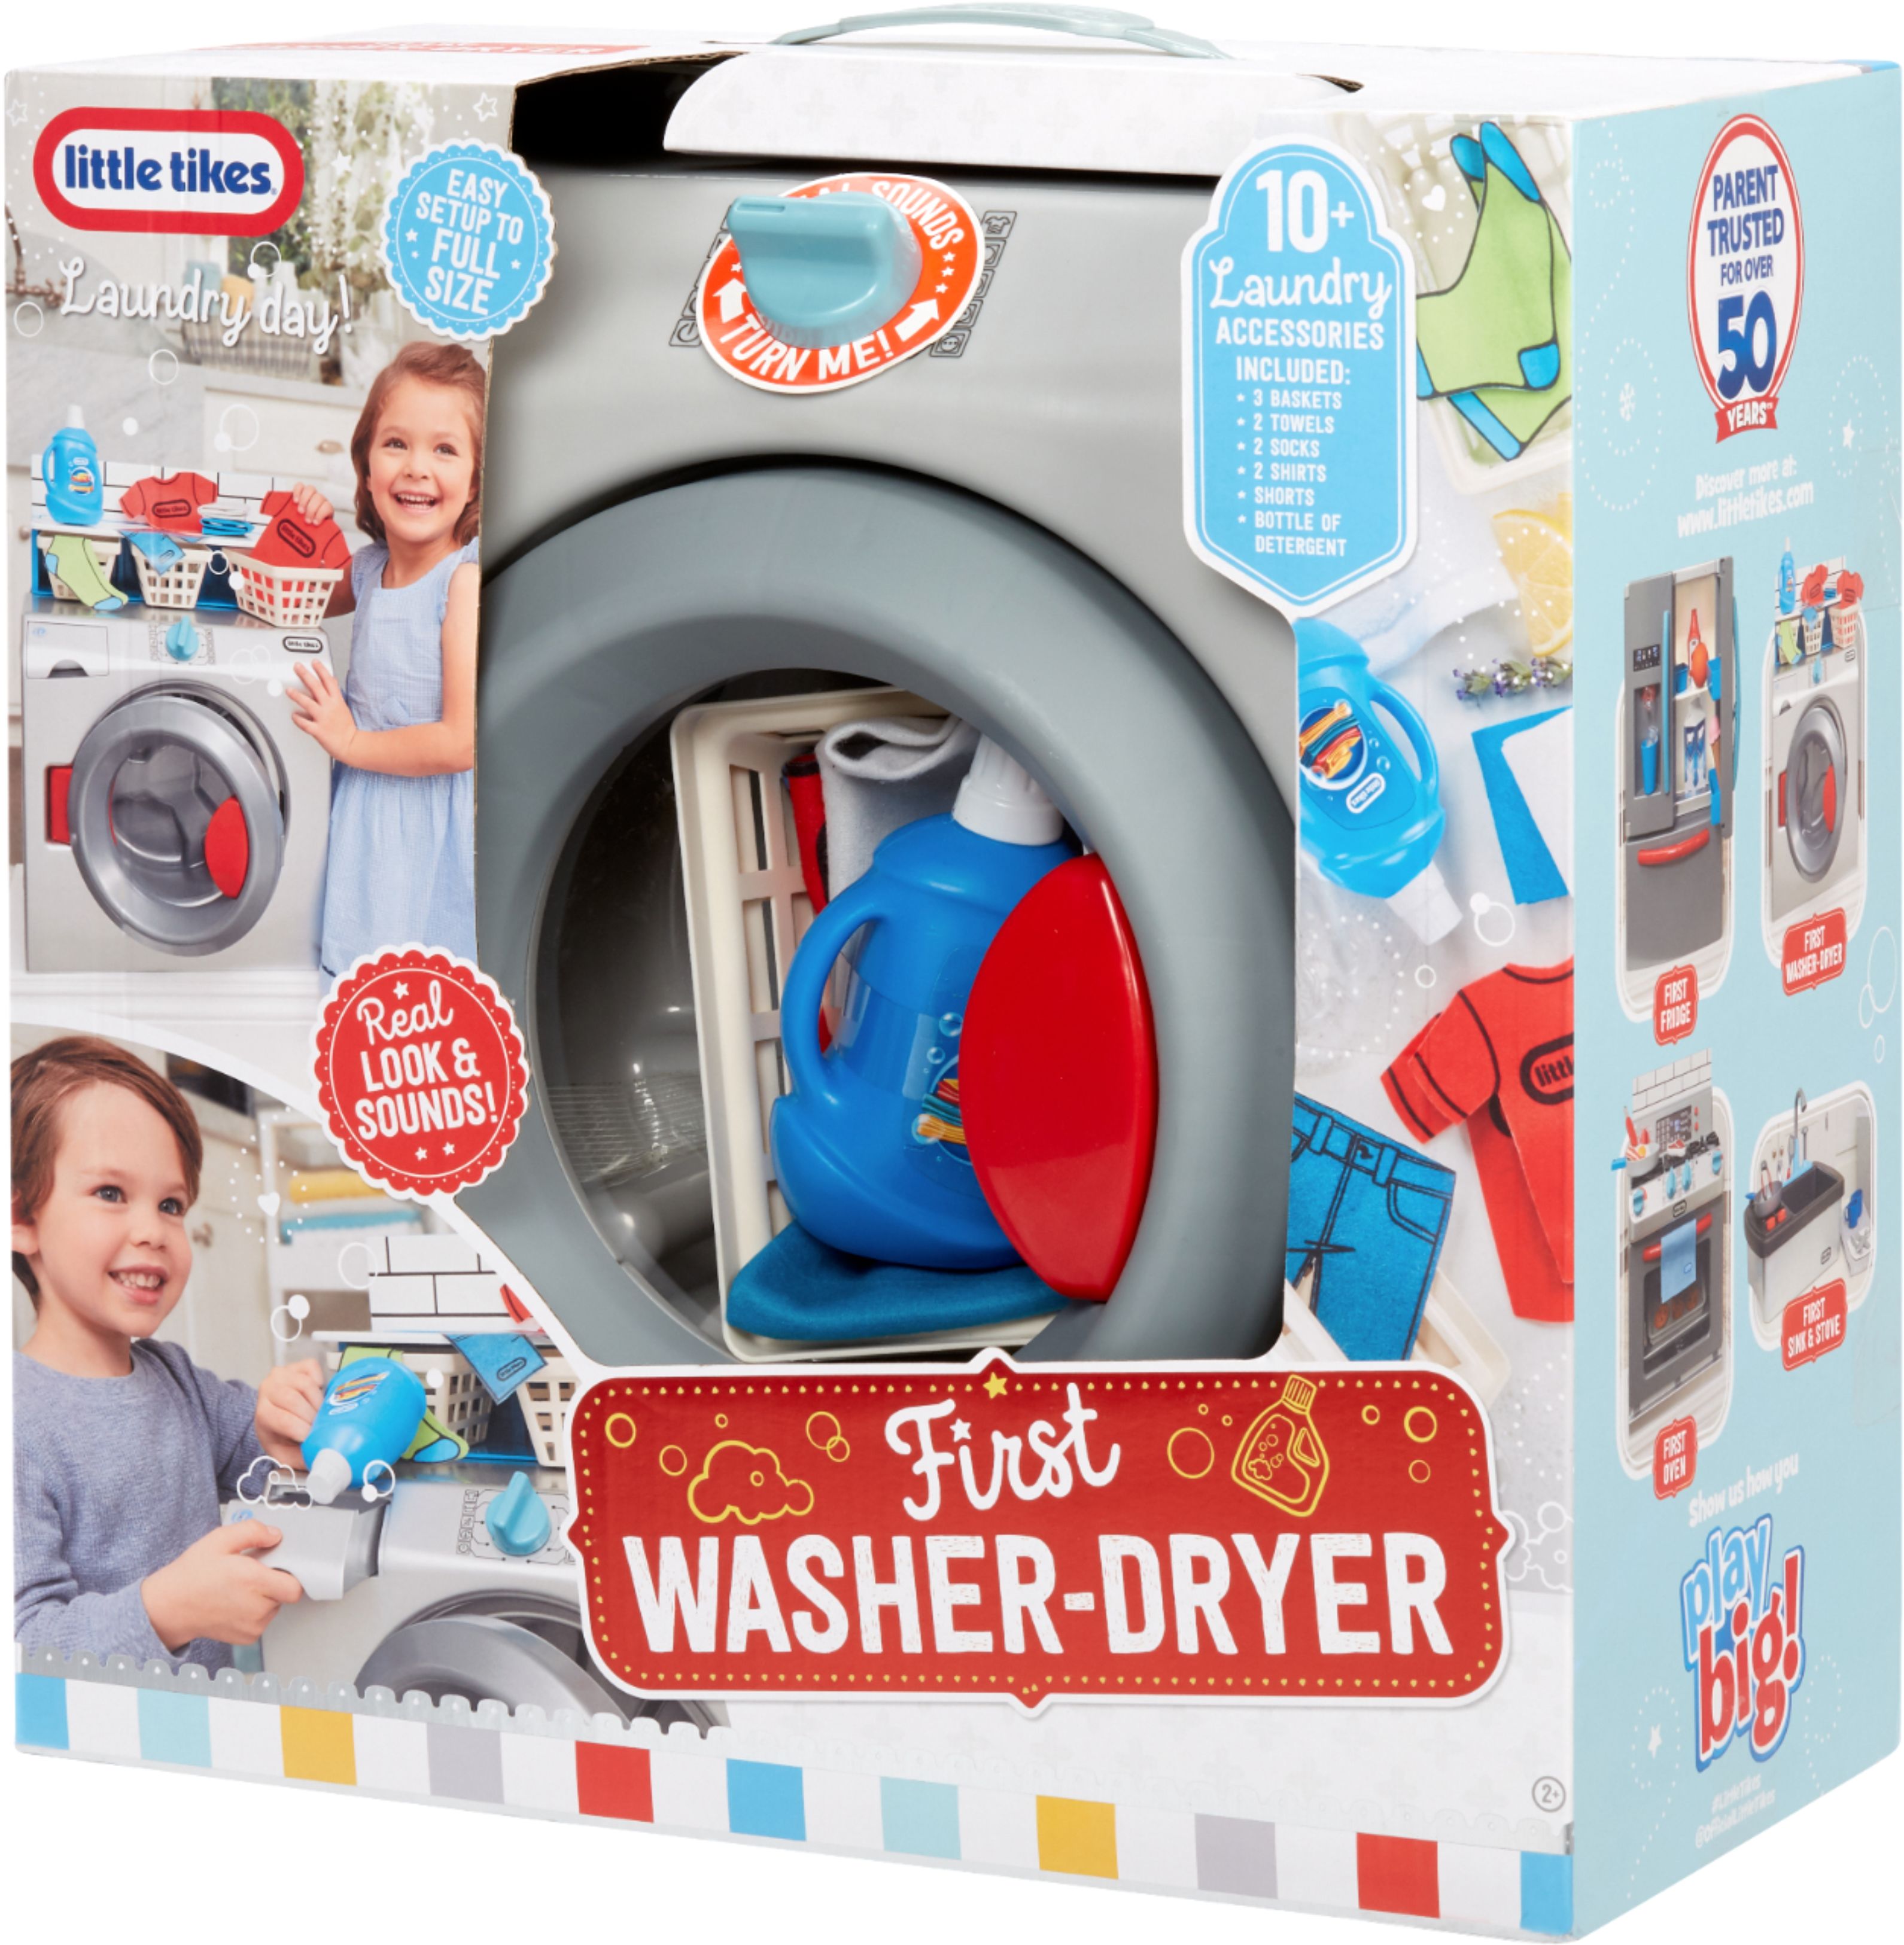 Baby Washer Dryer Set Realistic Pretend Play Toys for Kids Interactive Toy Washing Machine with Sound and Laundry Accessories 